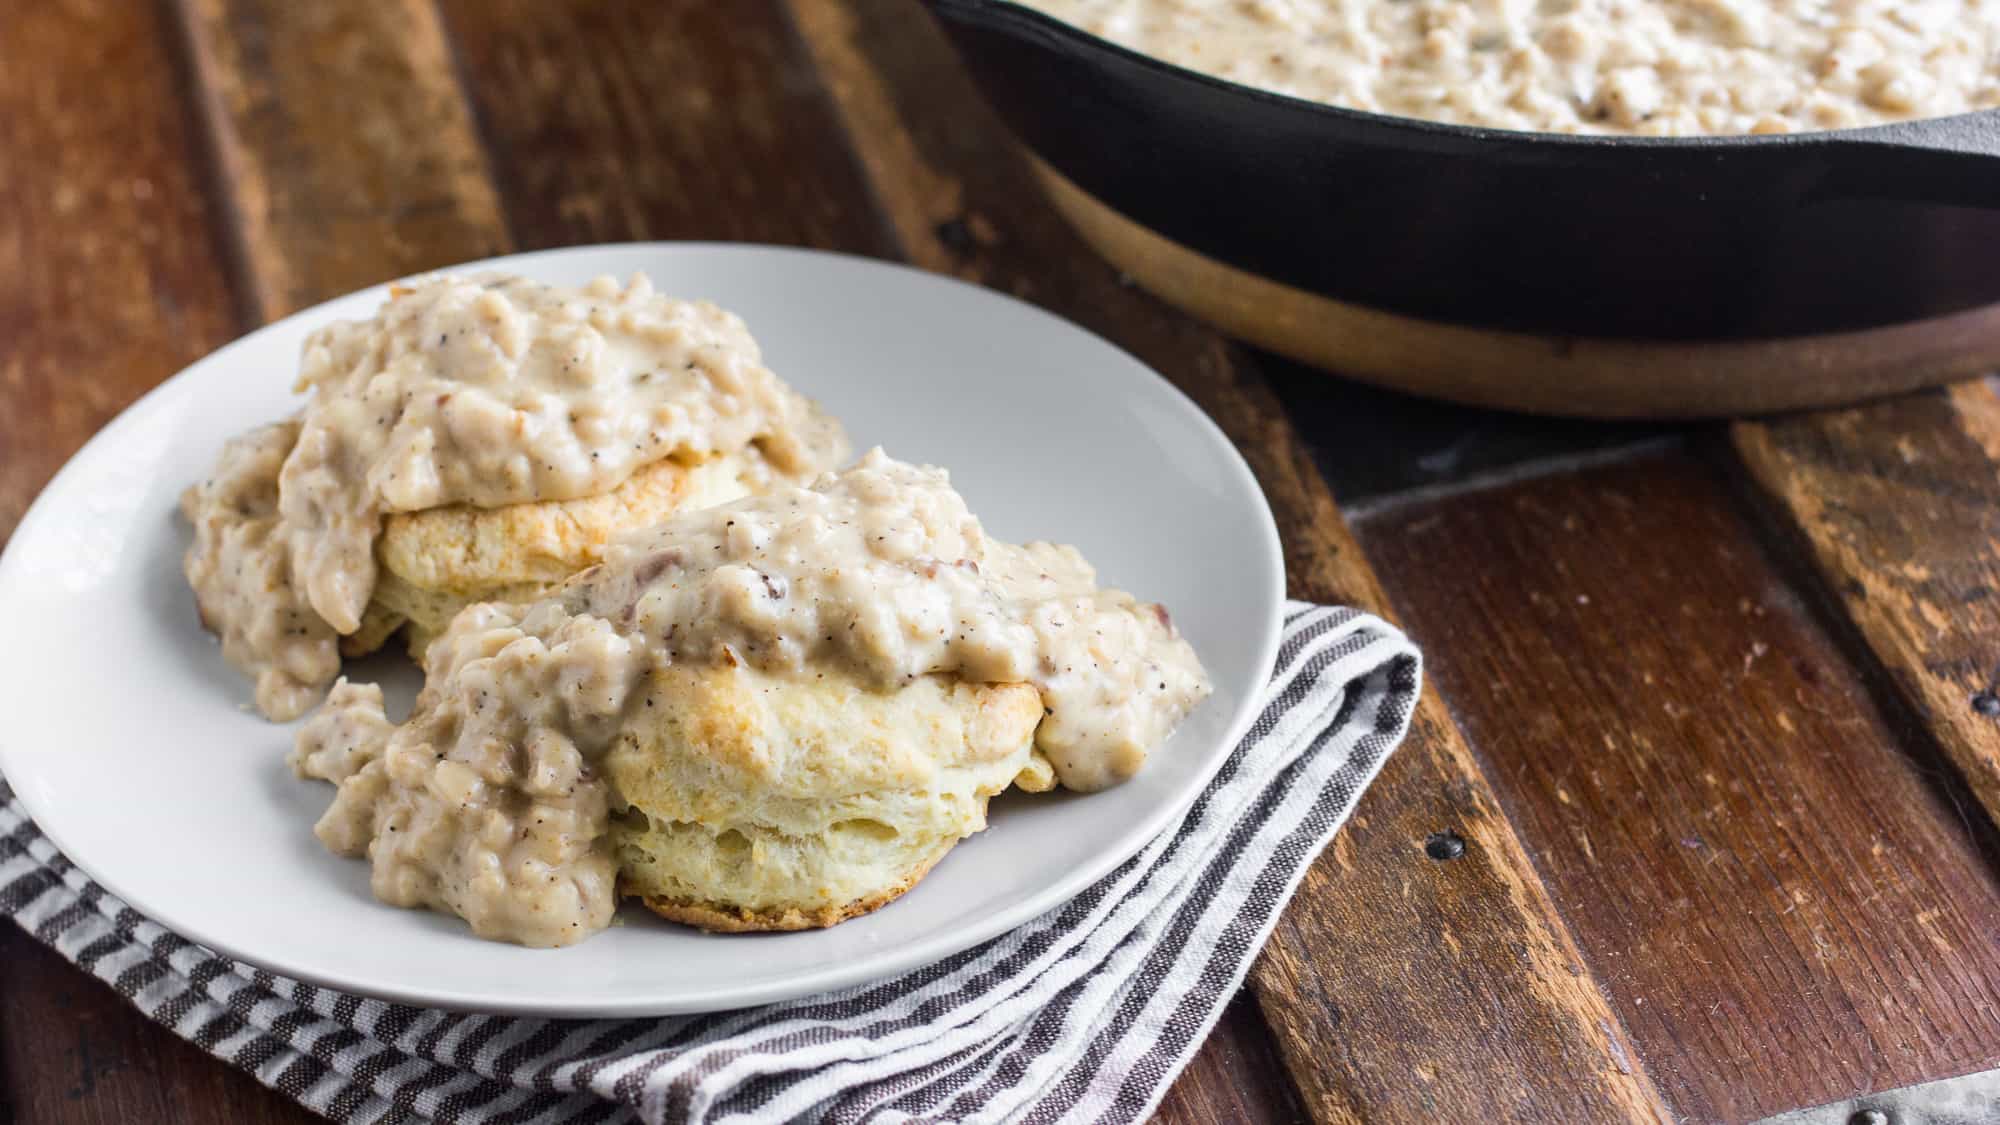 Sausage Gravy With Buttermilk Biscuits Recipe How To Make,Pet Wallaby